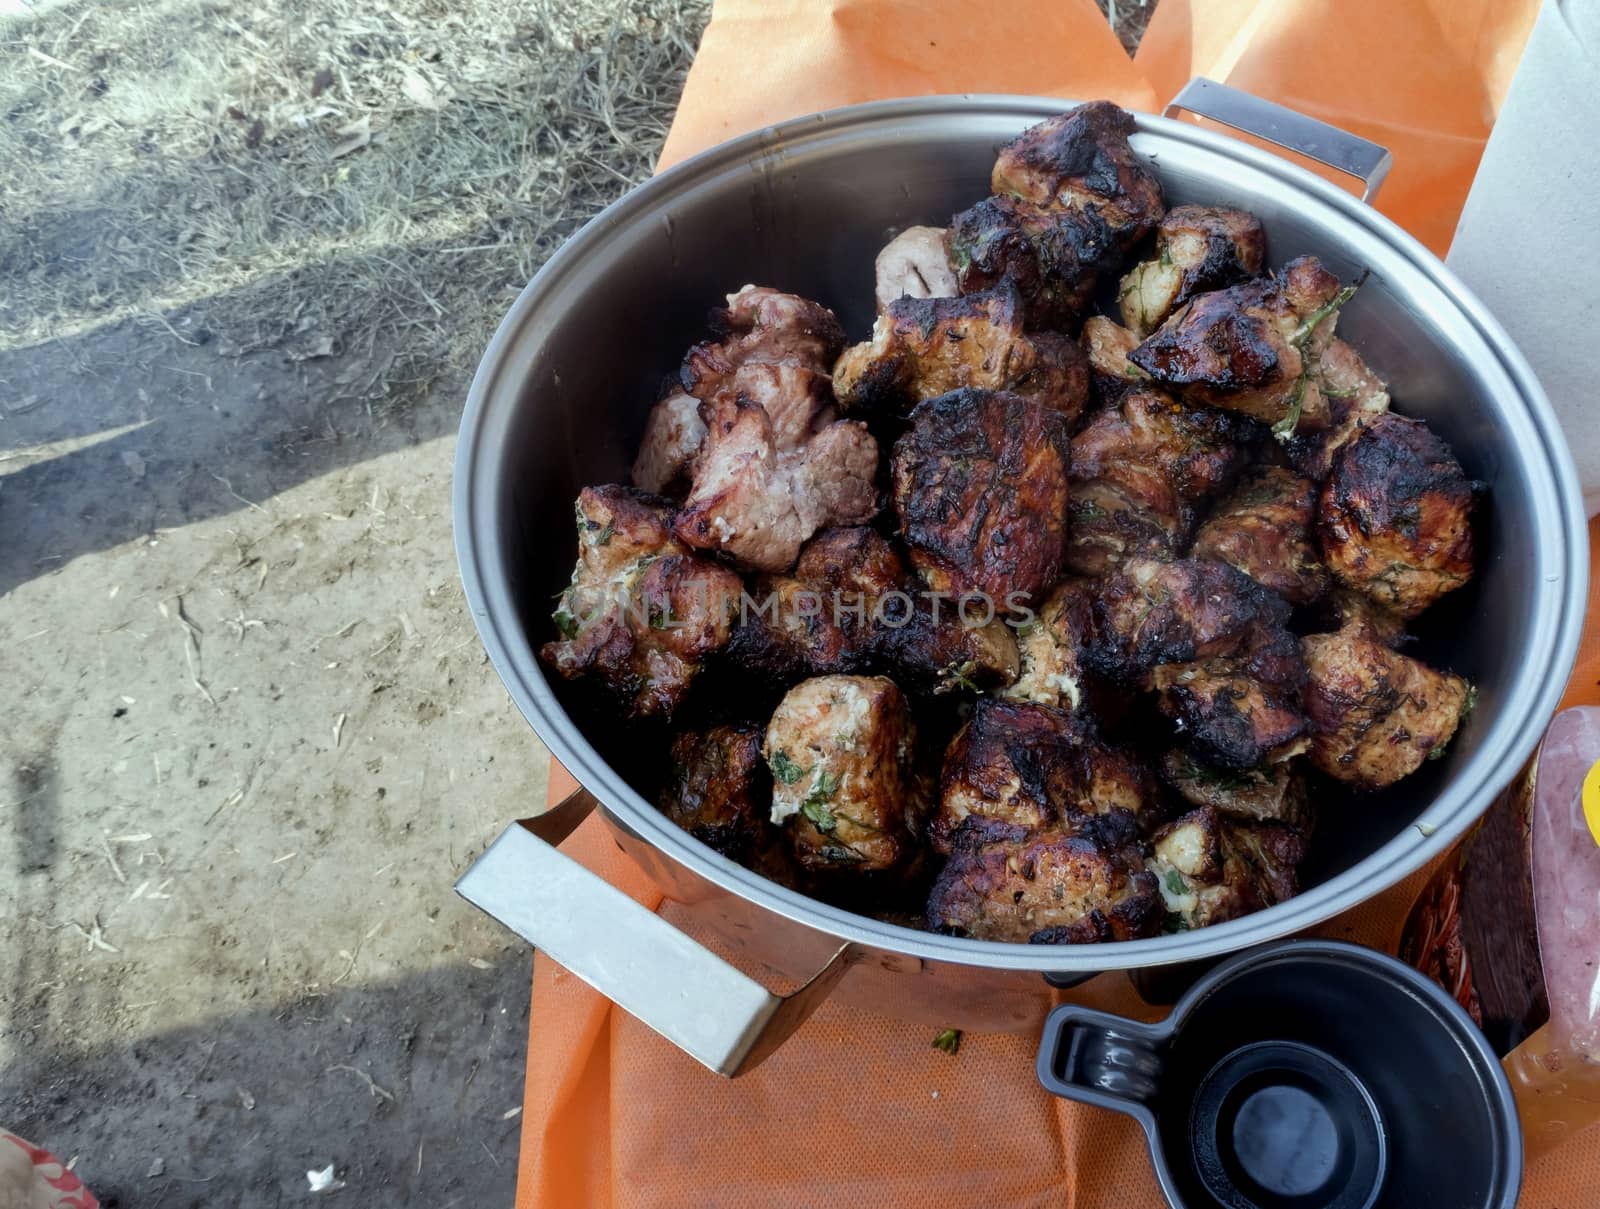 roast on the grill, the meat is collected in a large saucepan by valerypetr